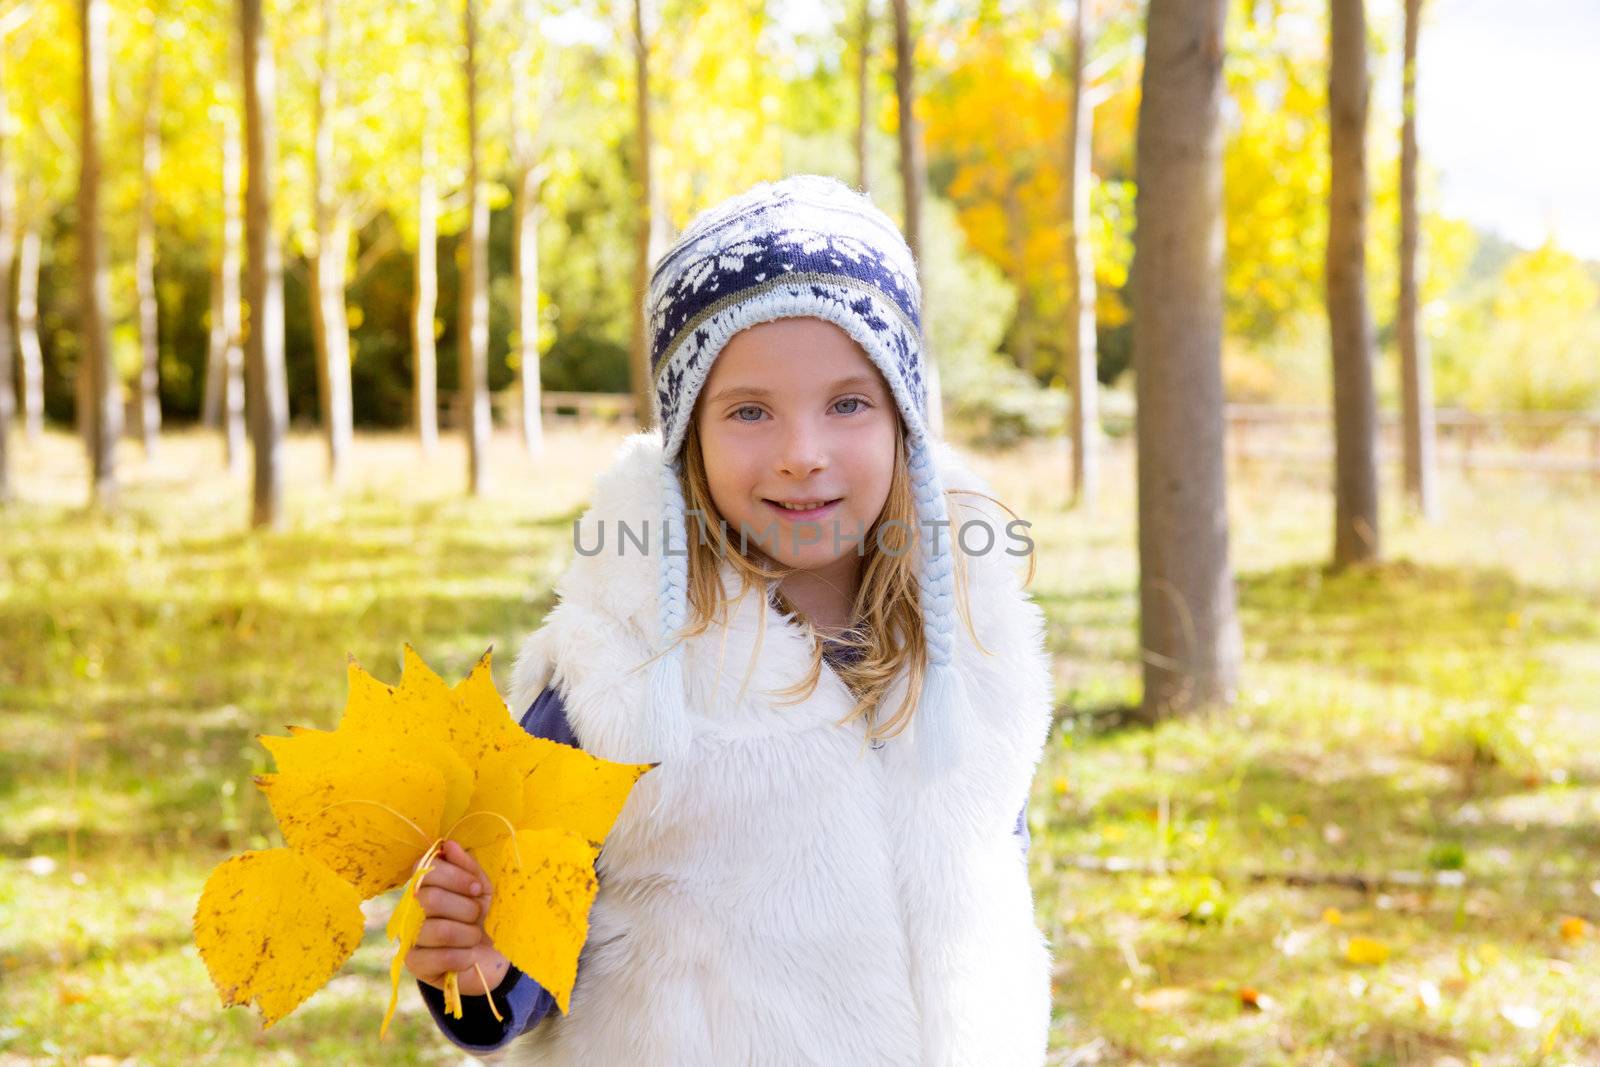 Child girl in autumn poplar forest with yellow fall leaves in hand smiling happy outdoor